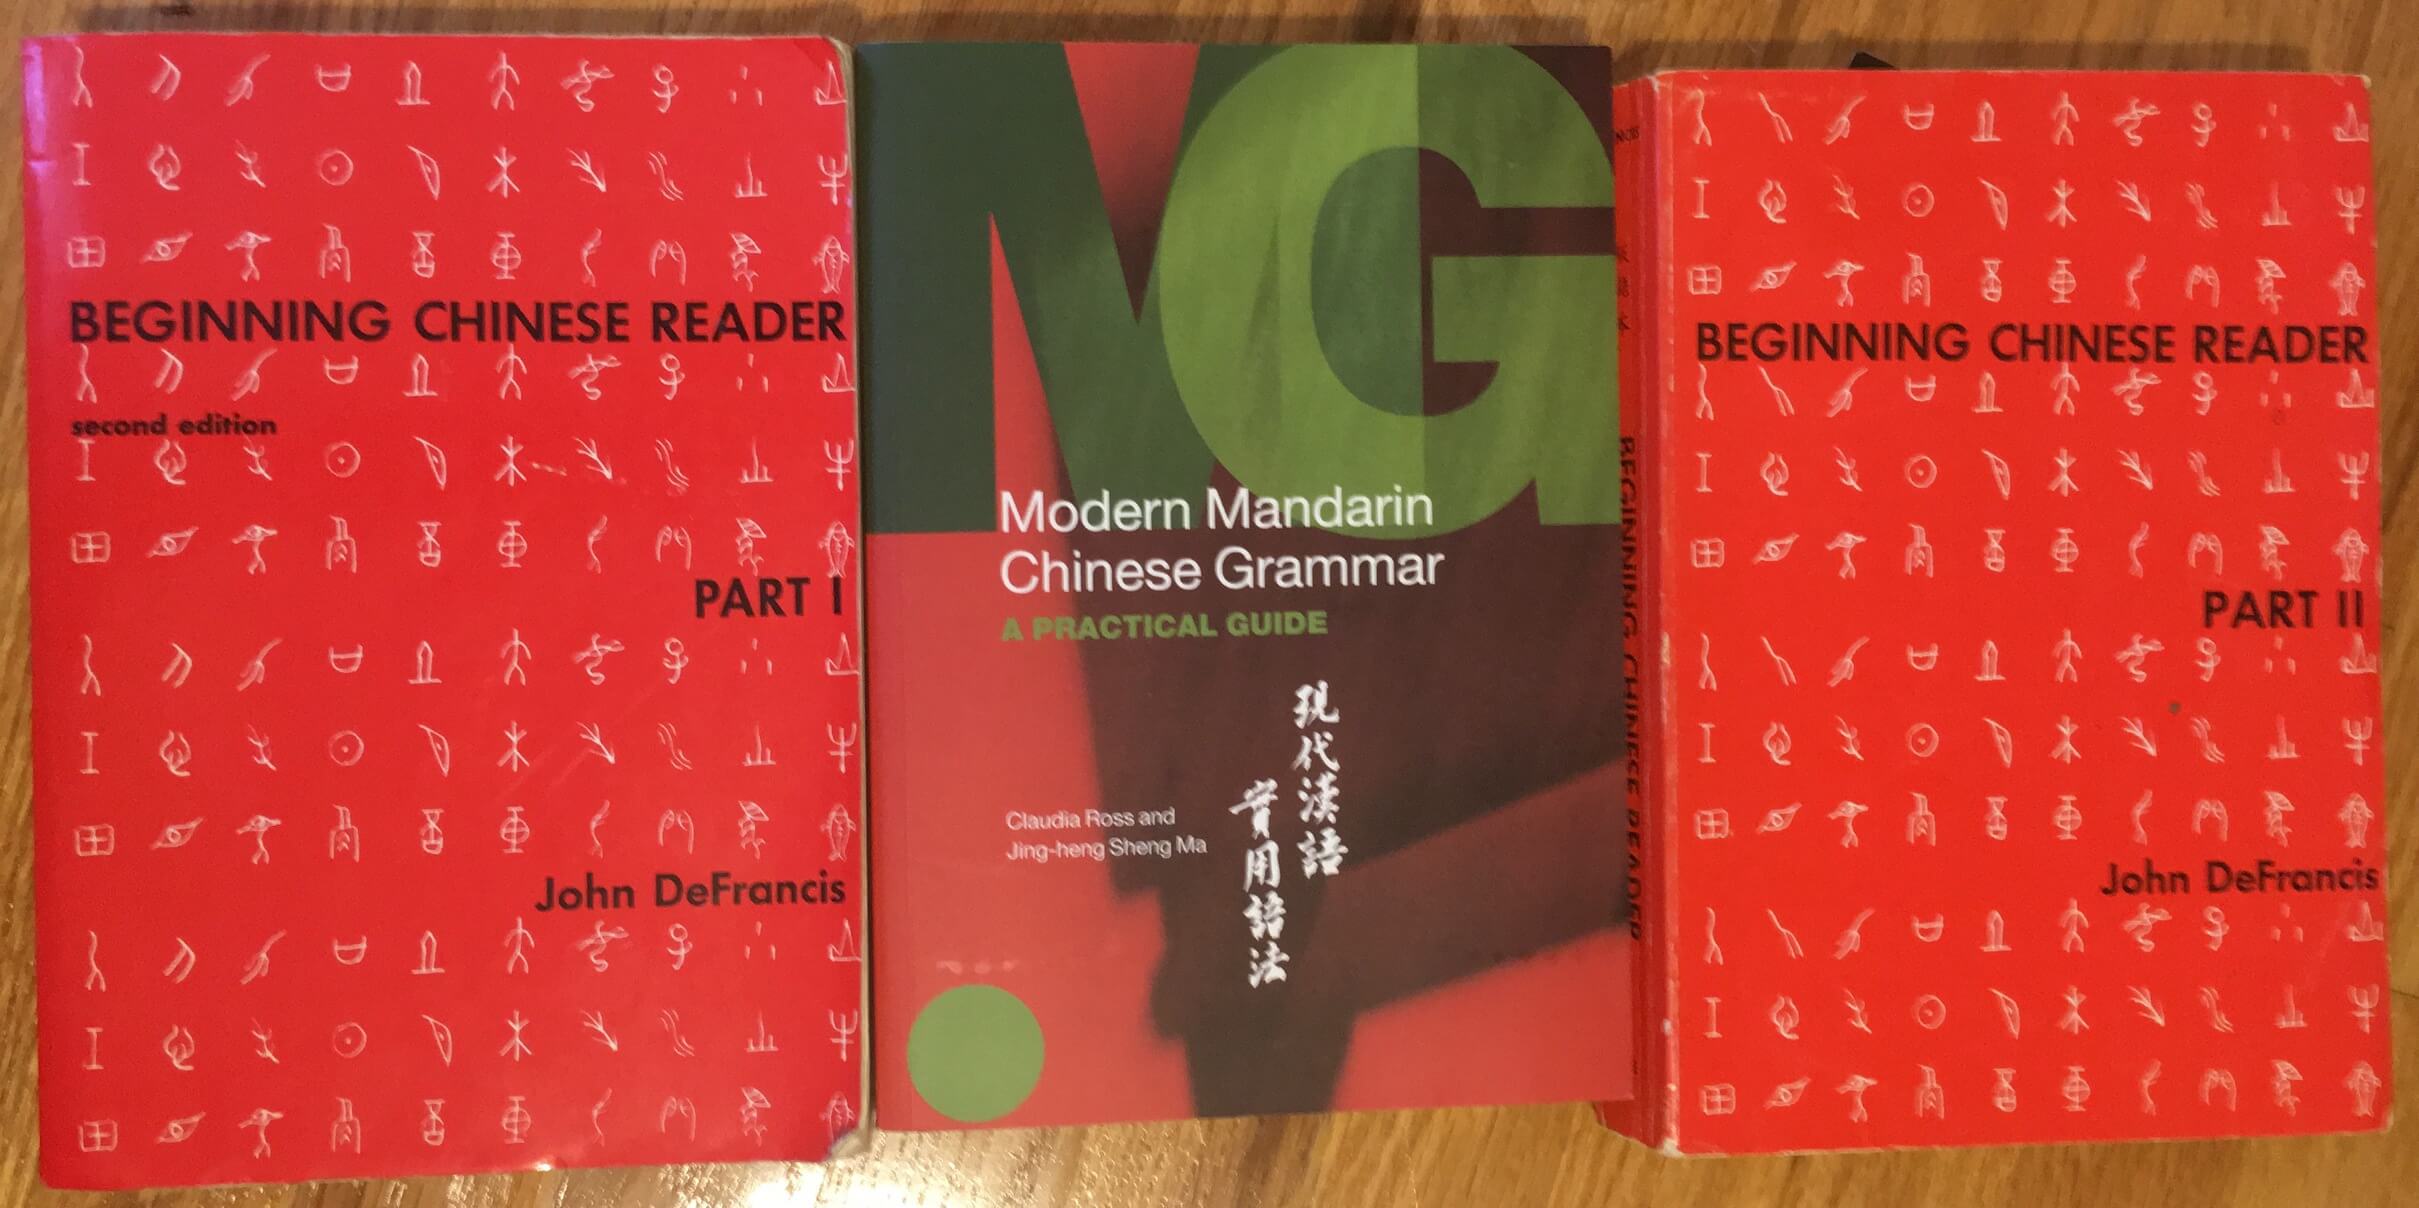 Photo of Chinese readers and grammar book